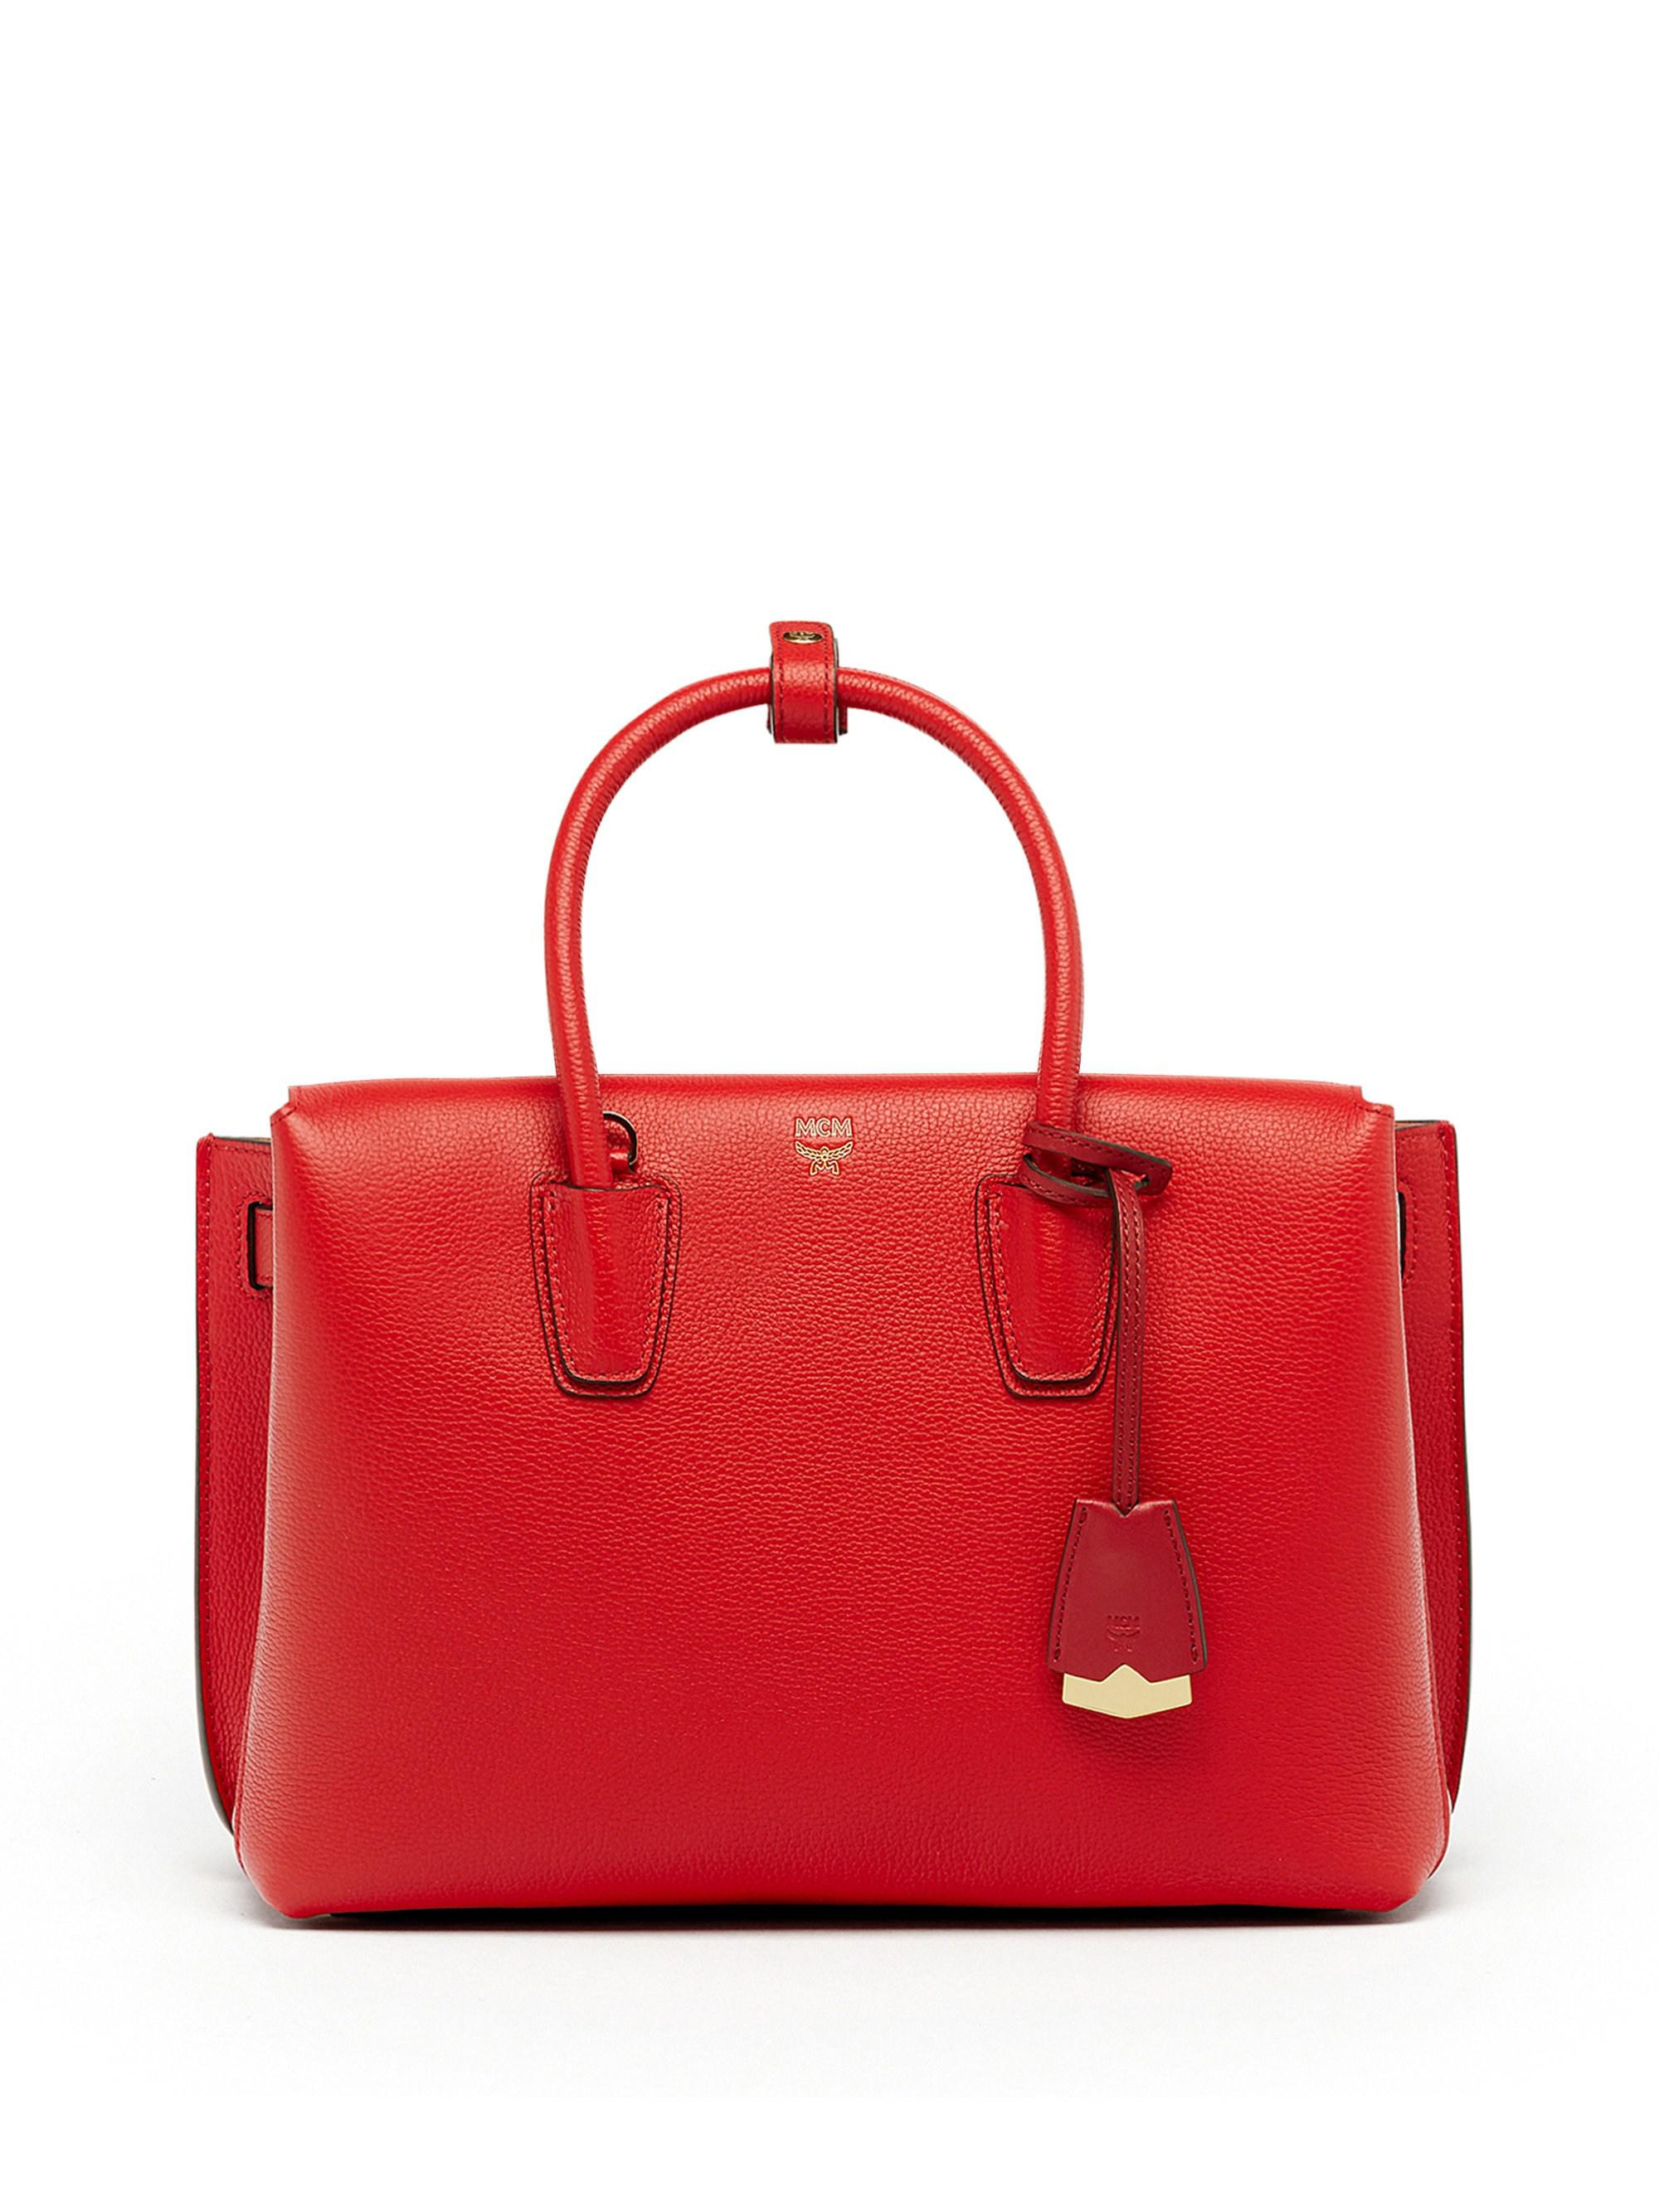 MCM Milla Medium Leather Tote Bag in Ruby Red (Red) - Lyst